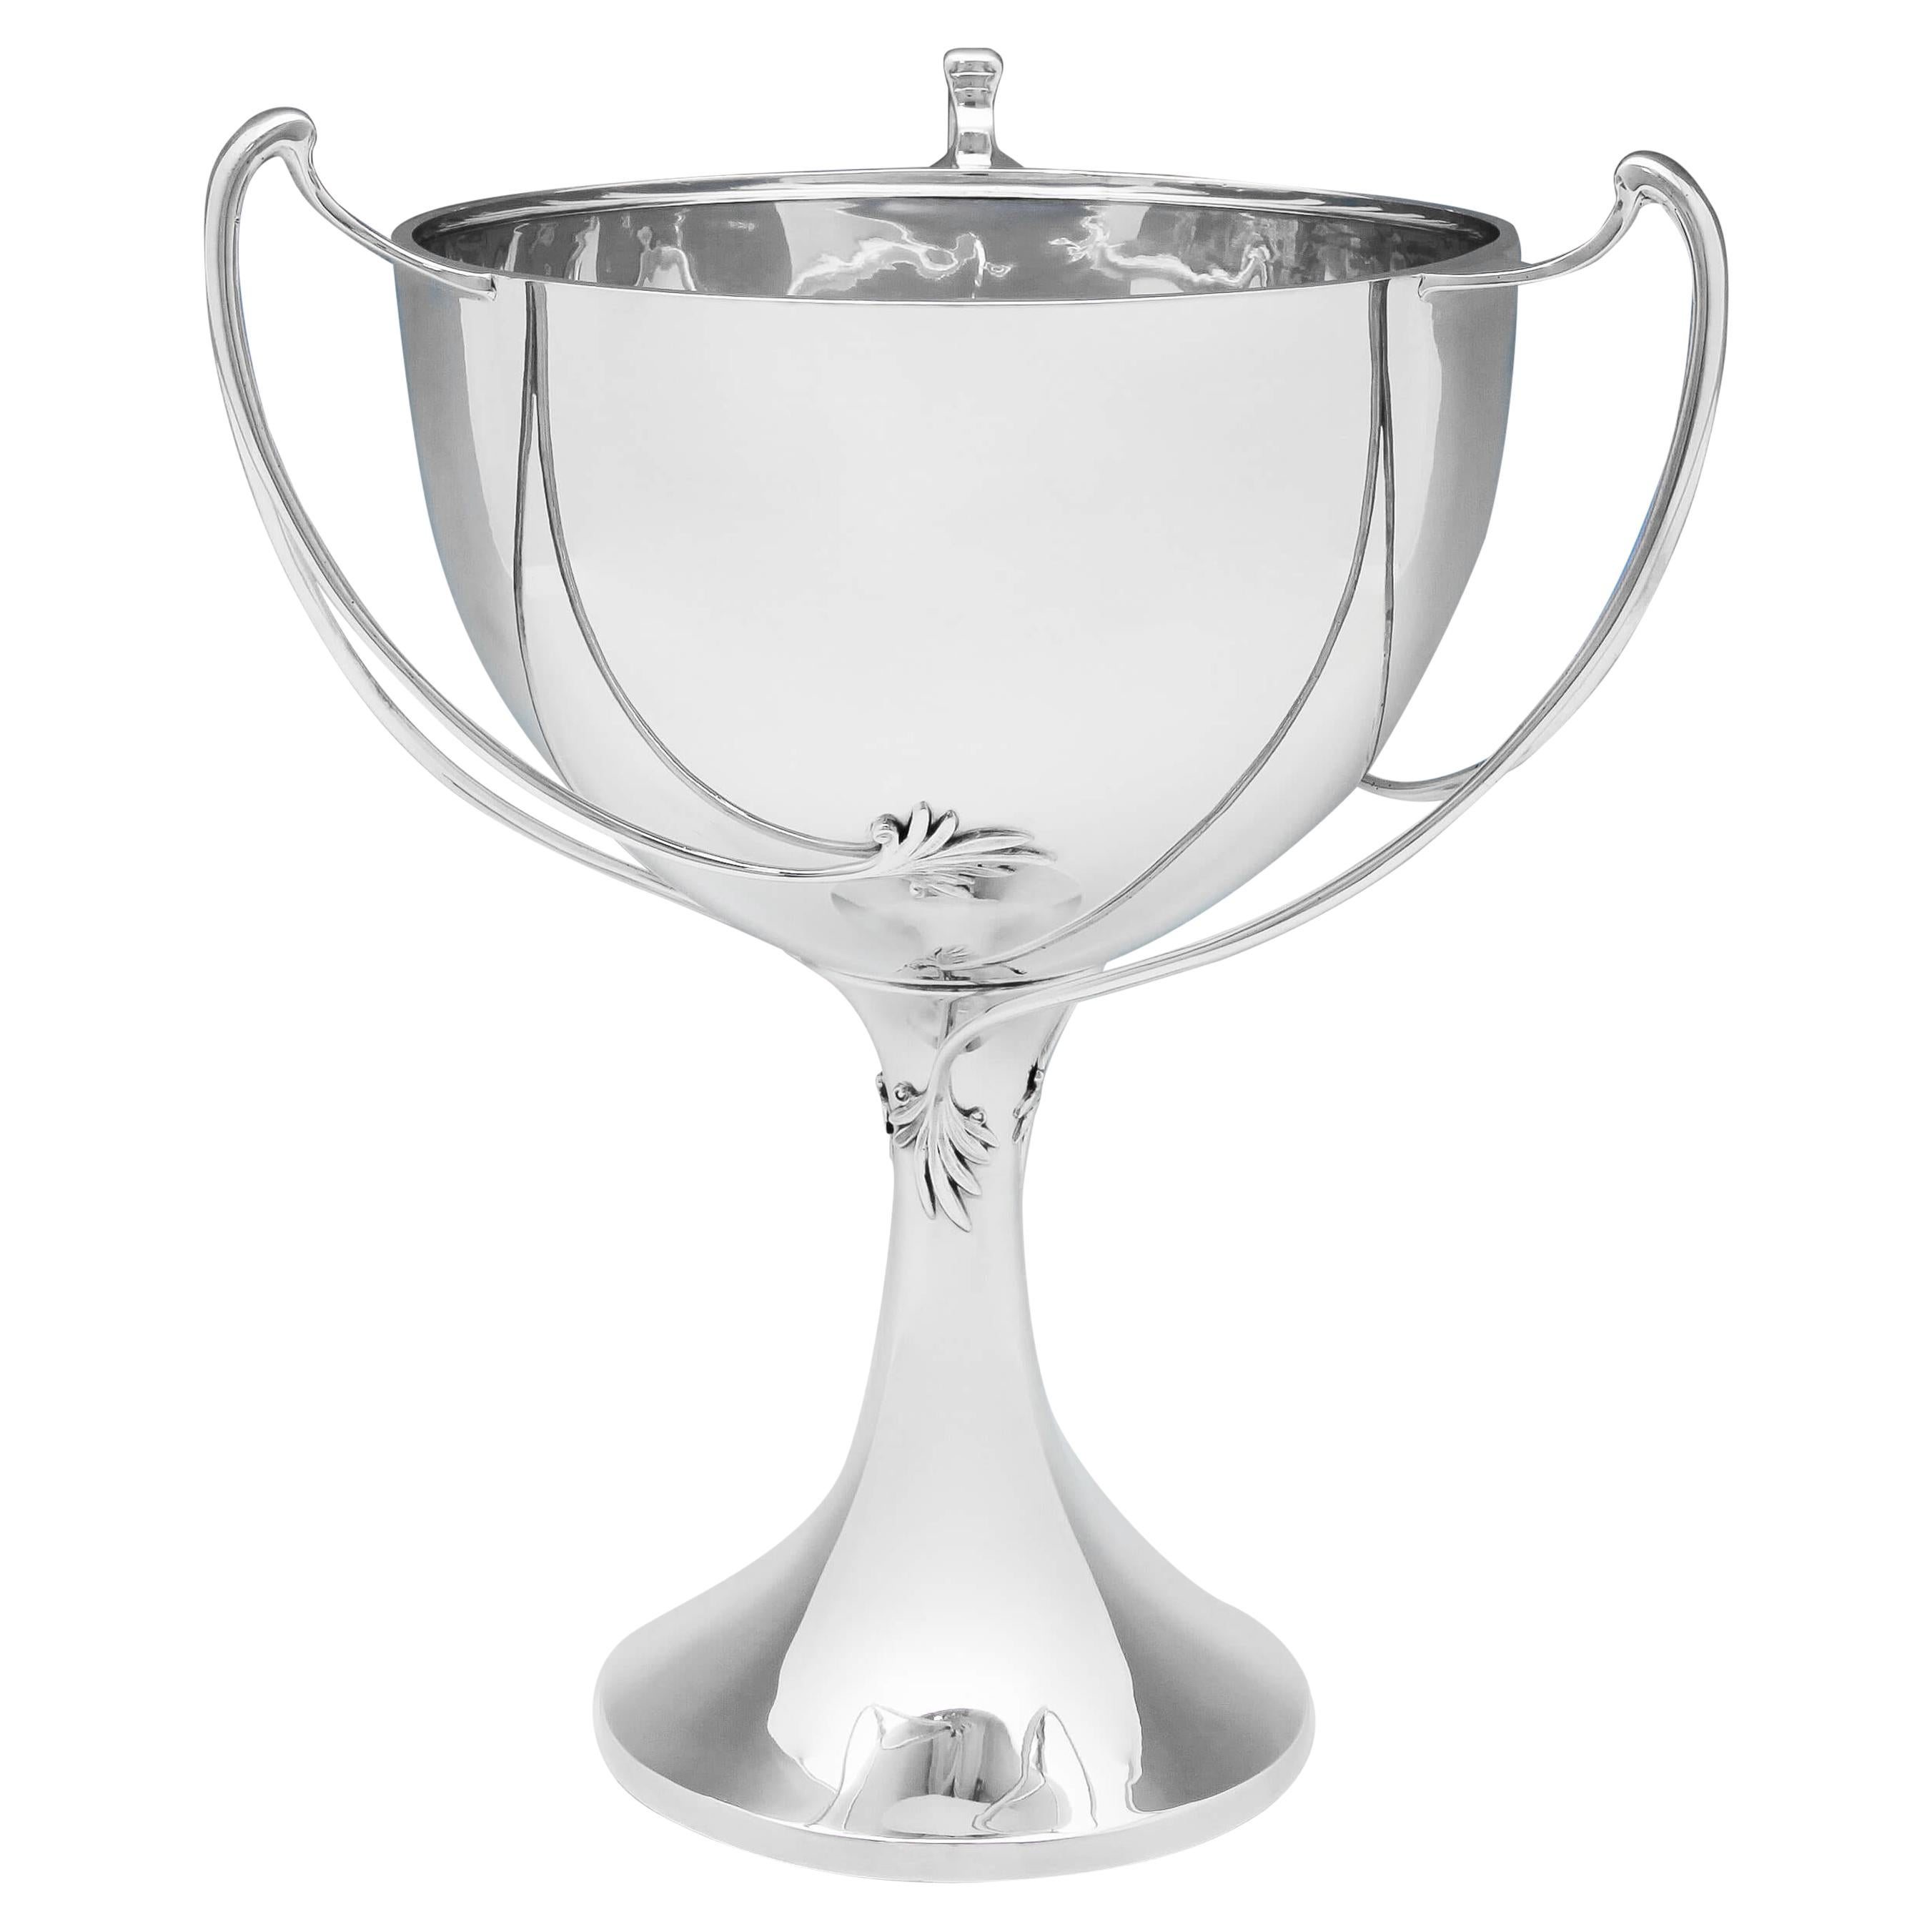 Three Handled Sterling Silver Trophy Cup Hallmarked In London in 1927